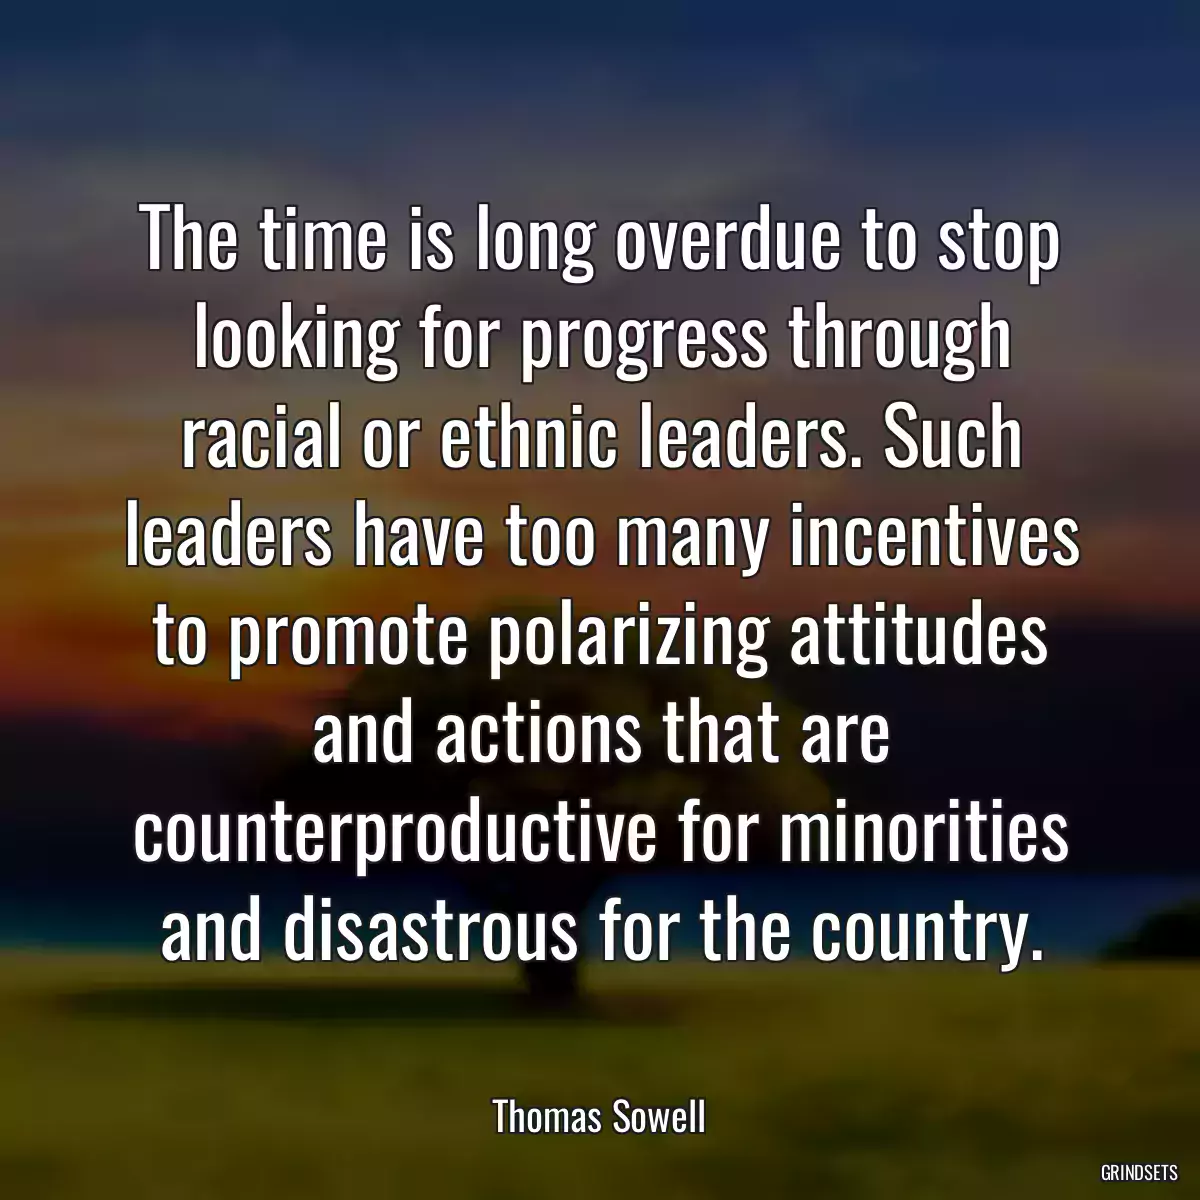 The time is long overdue to stop looking for progress through racial or ethnic leaders. Such leaders have too many incentives to promote polarizing attitudes and actions that are counterproductive for minorities and disastrous for the country.